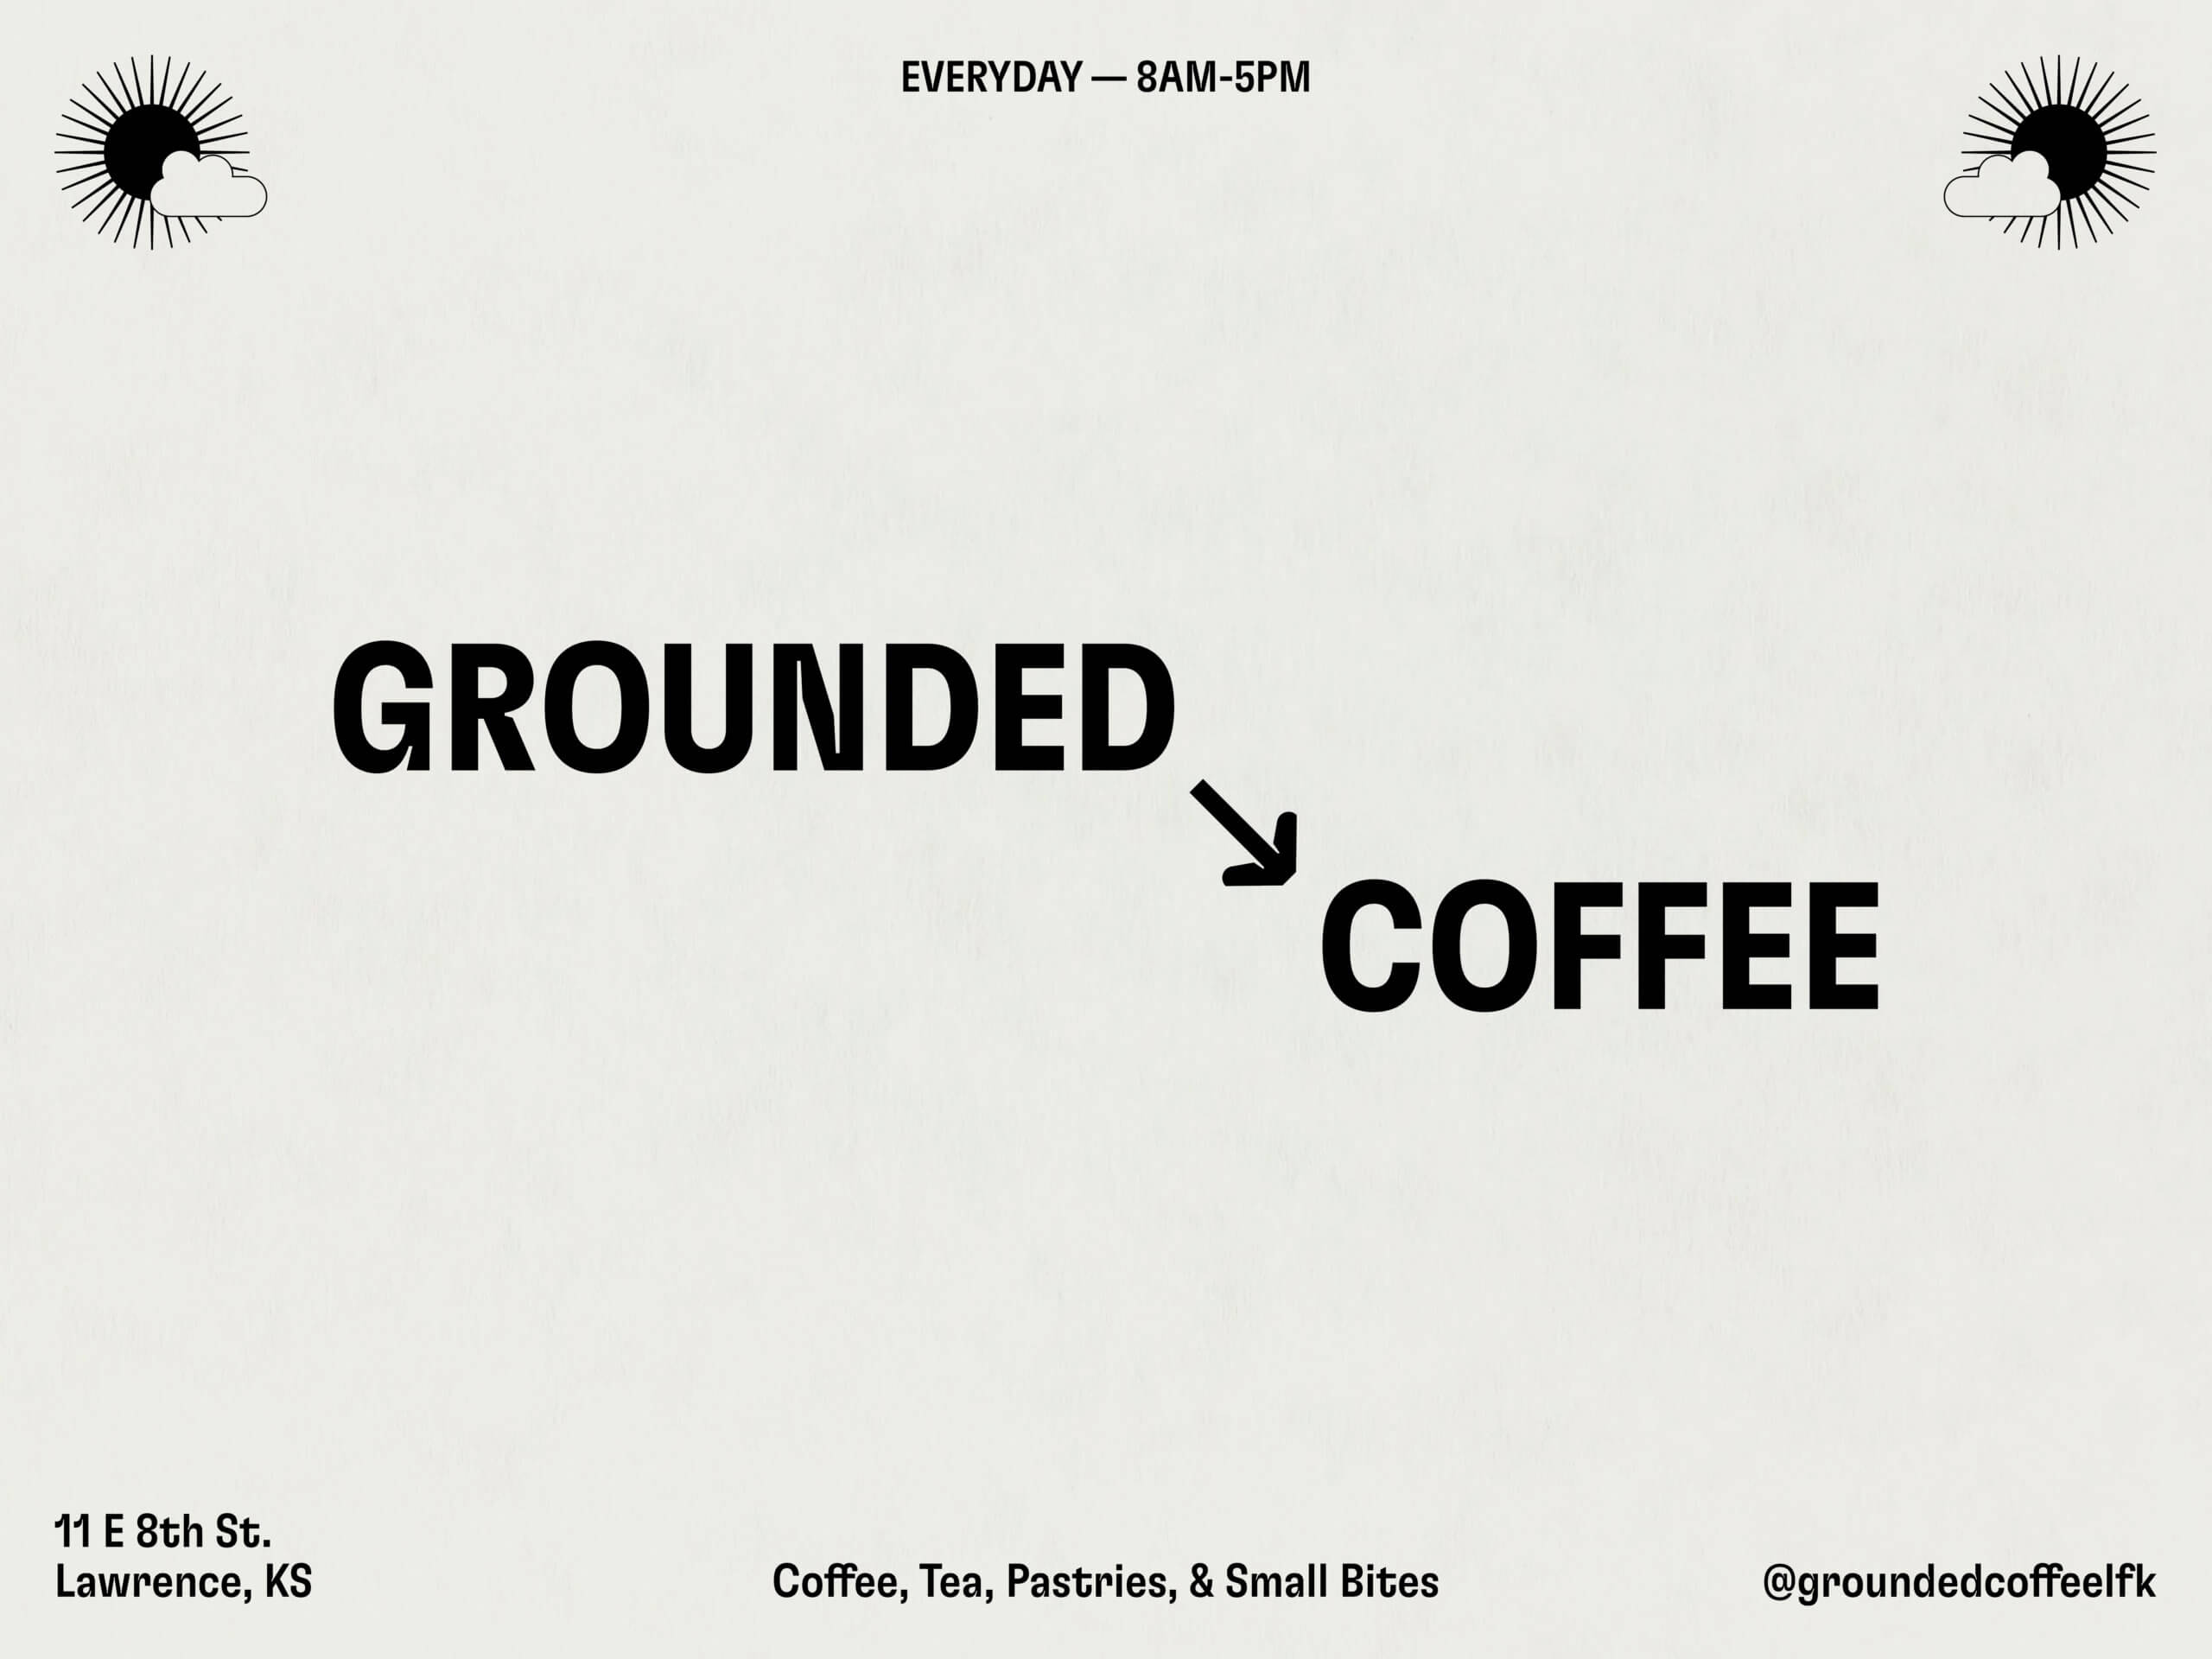 Grounded Coffee